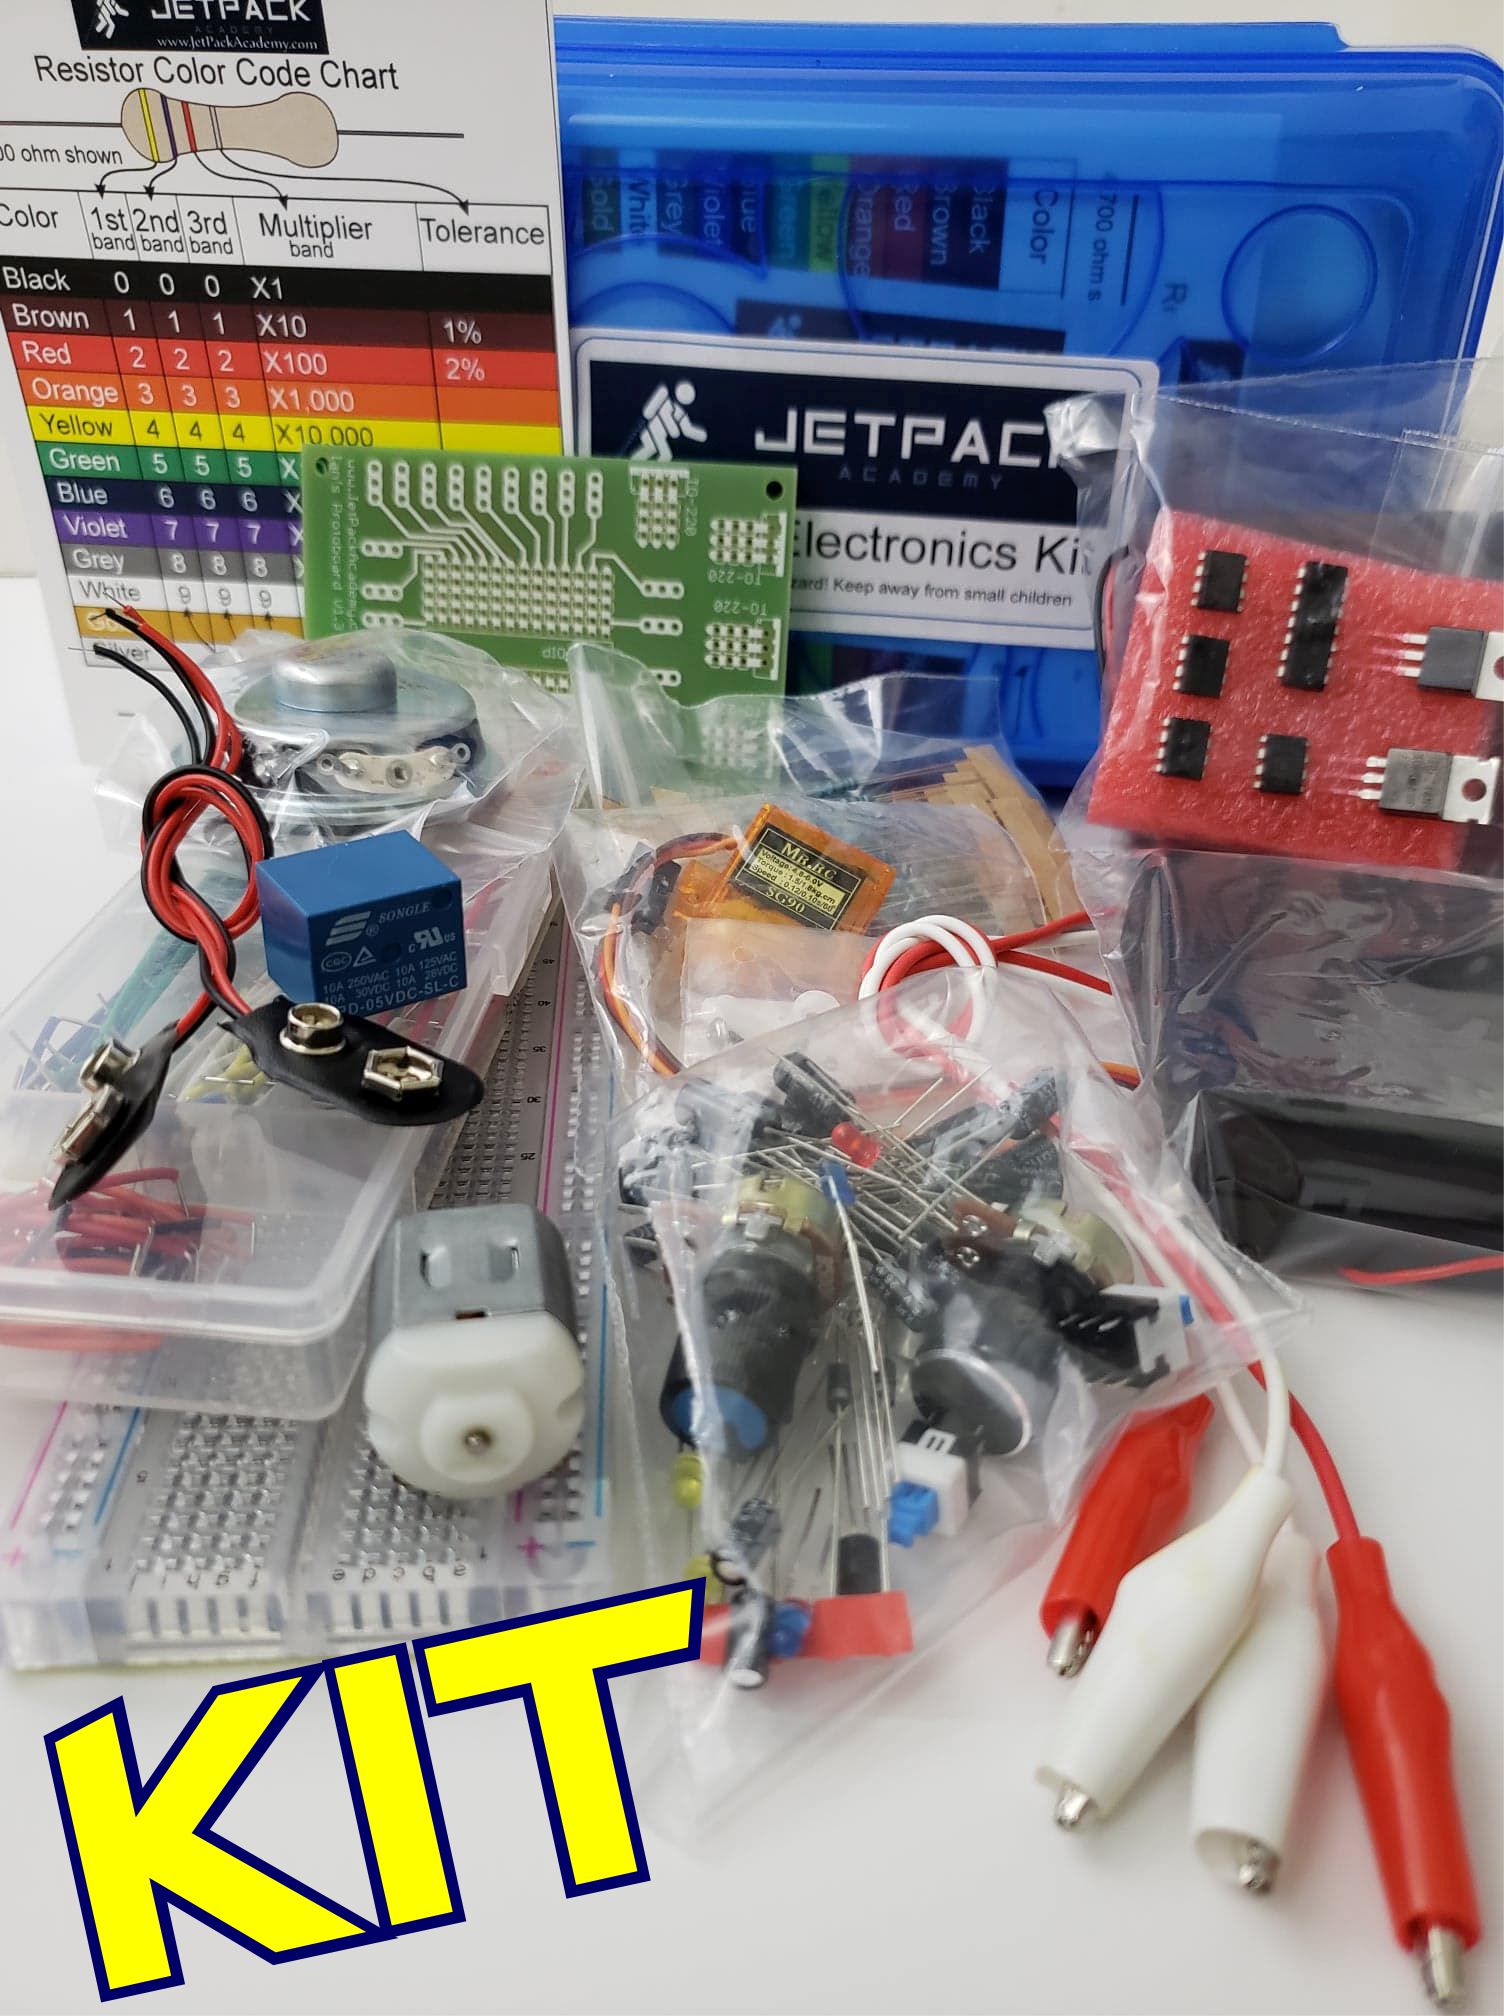 Electricty & electronics kit for Robotics Course, Part 1: Electricity and  Electronics